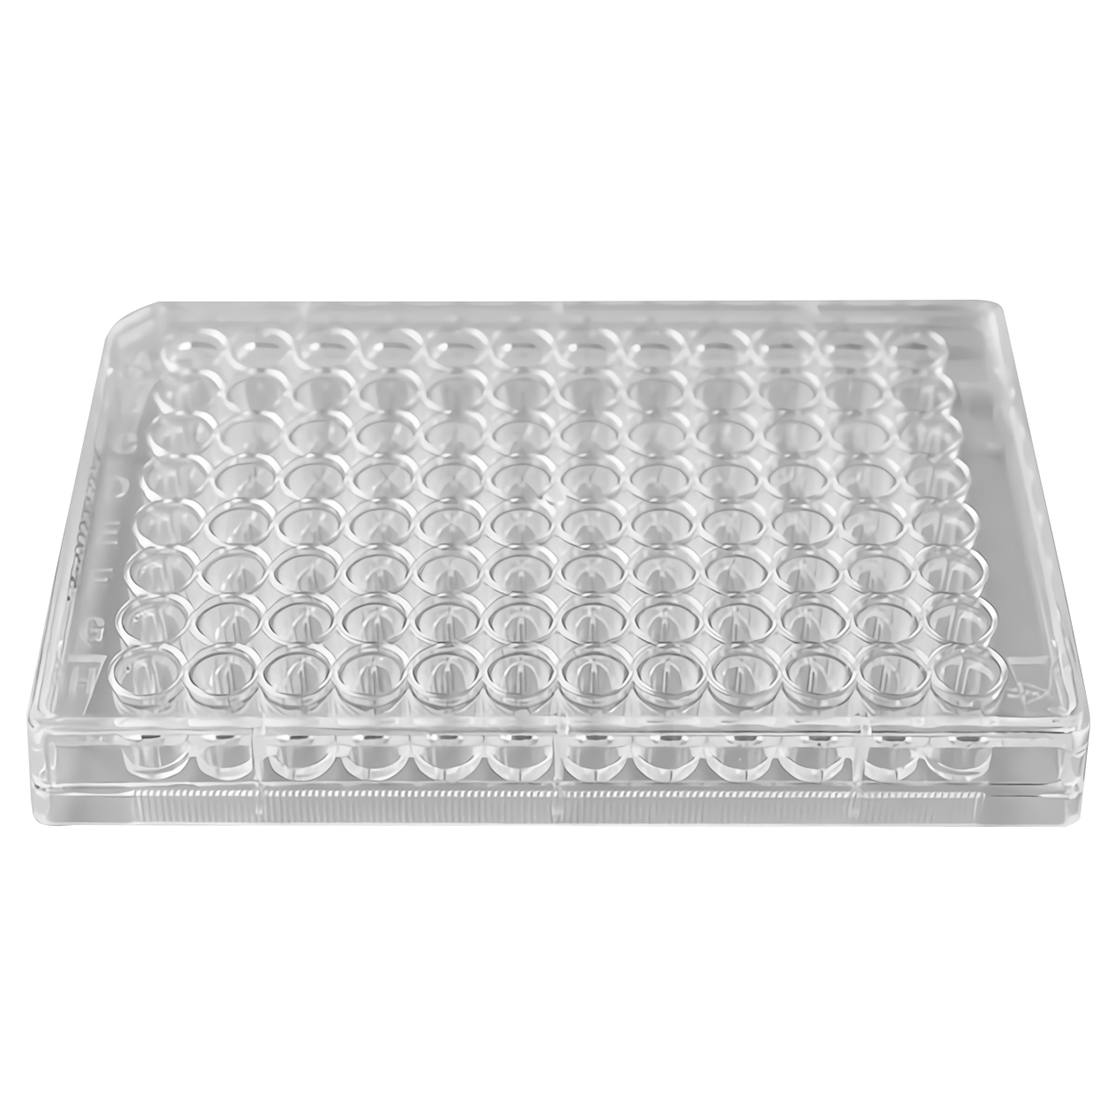 ADAMAS-BETA Cell Culture Plate 6-96 Well Flat Bottom TC Sterile Transparent Laboratory Microbial Plastic Culture Plate for Adherent Culture